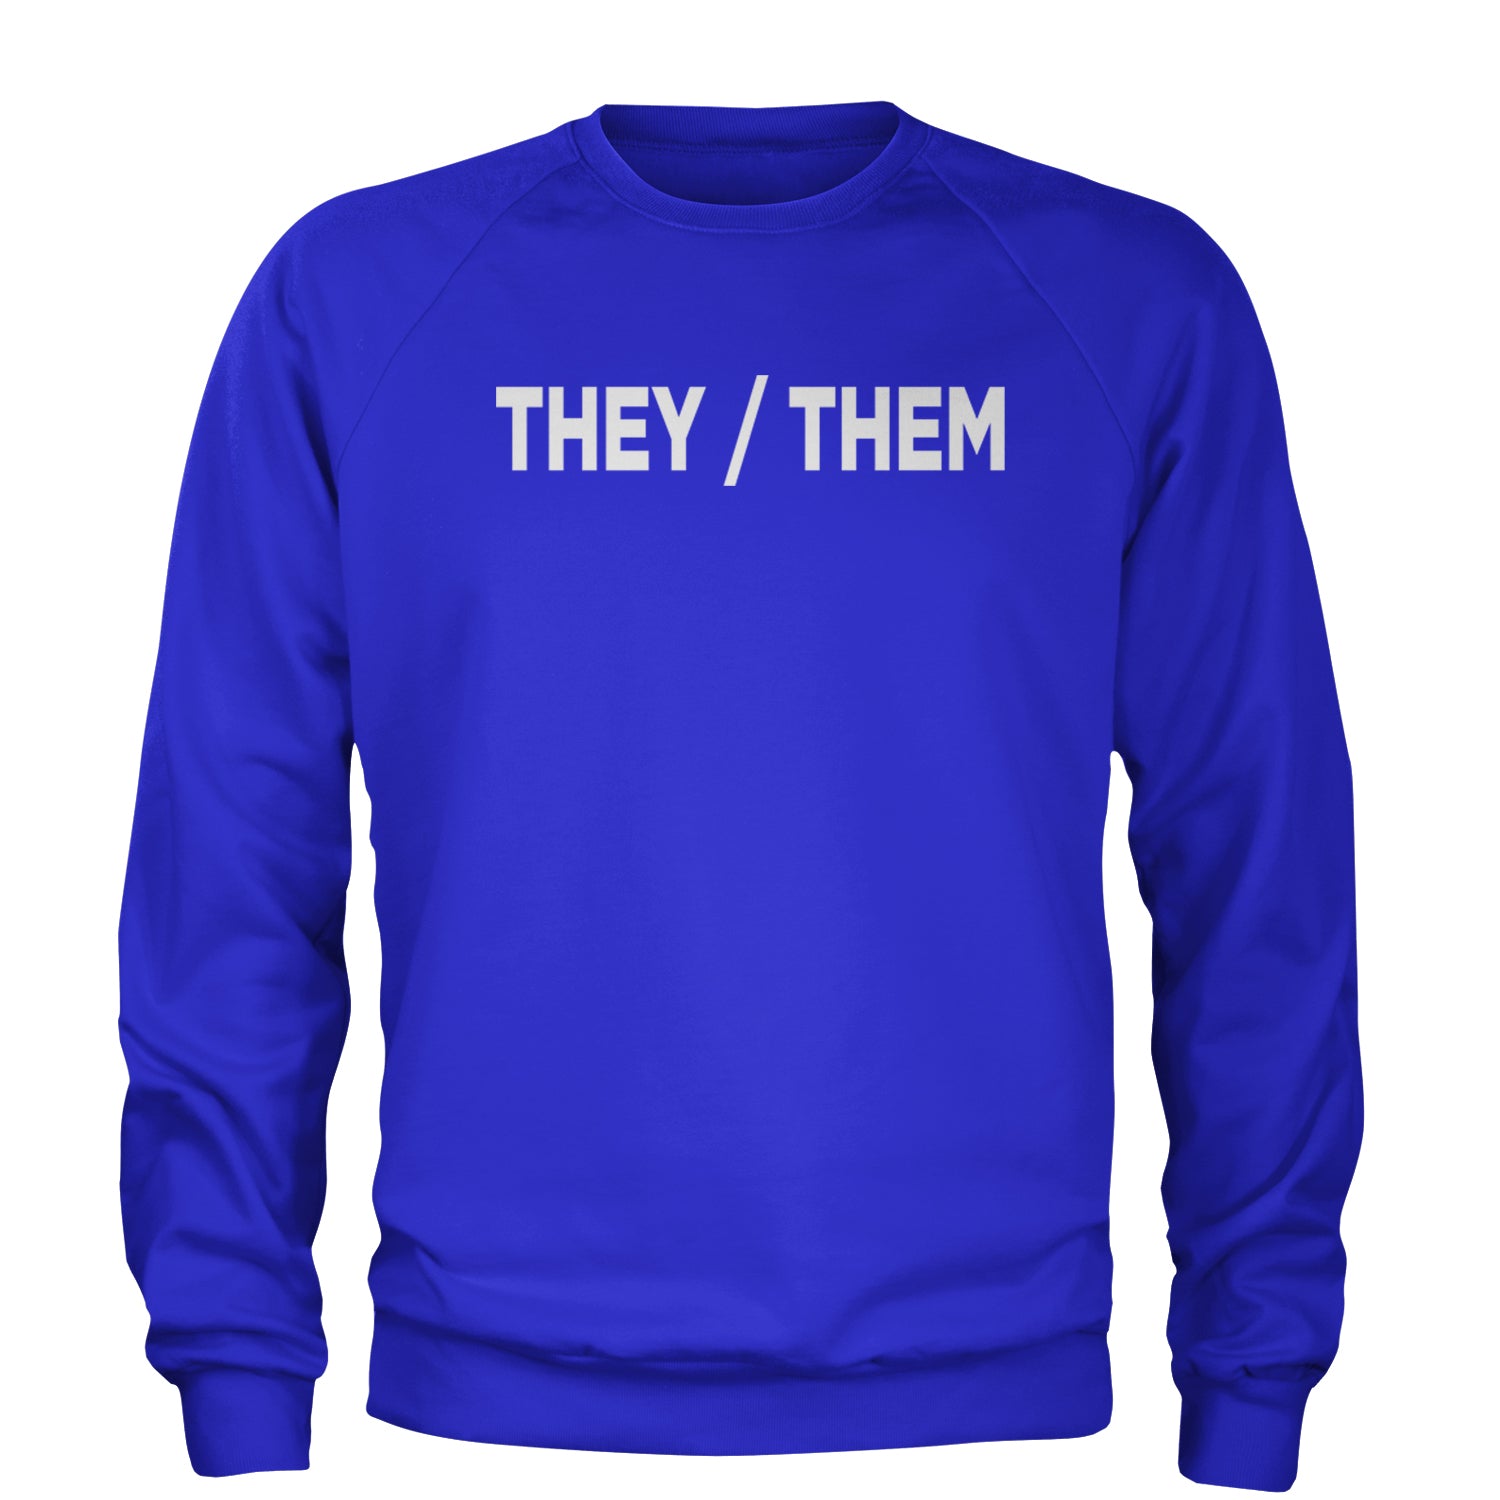 They Them Gender Pronouns Diversity and Inclusion Adult Crewneck Sweatshirt binary, civil, gay, he, her, him, nonbinary, pride, rights, she, them, they by Expression Tees